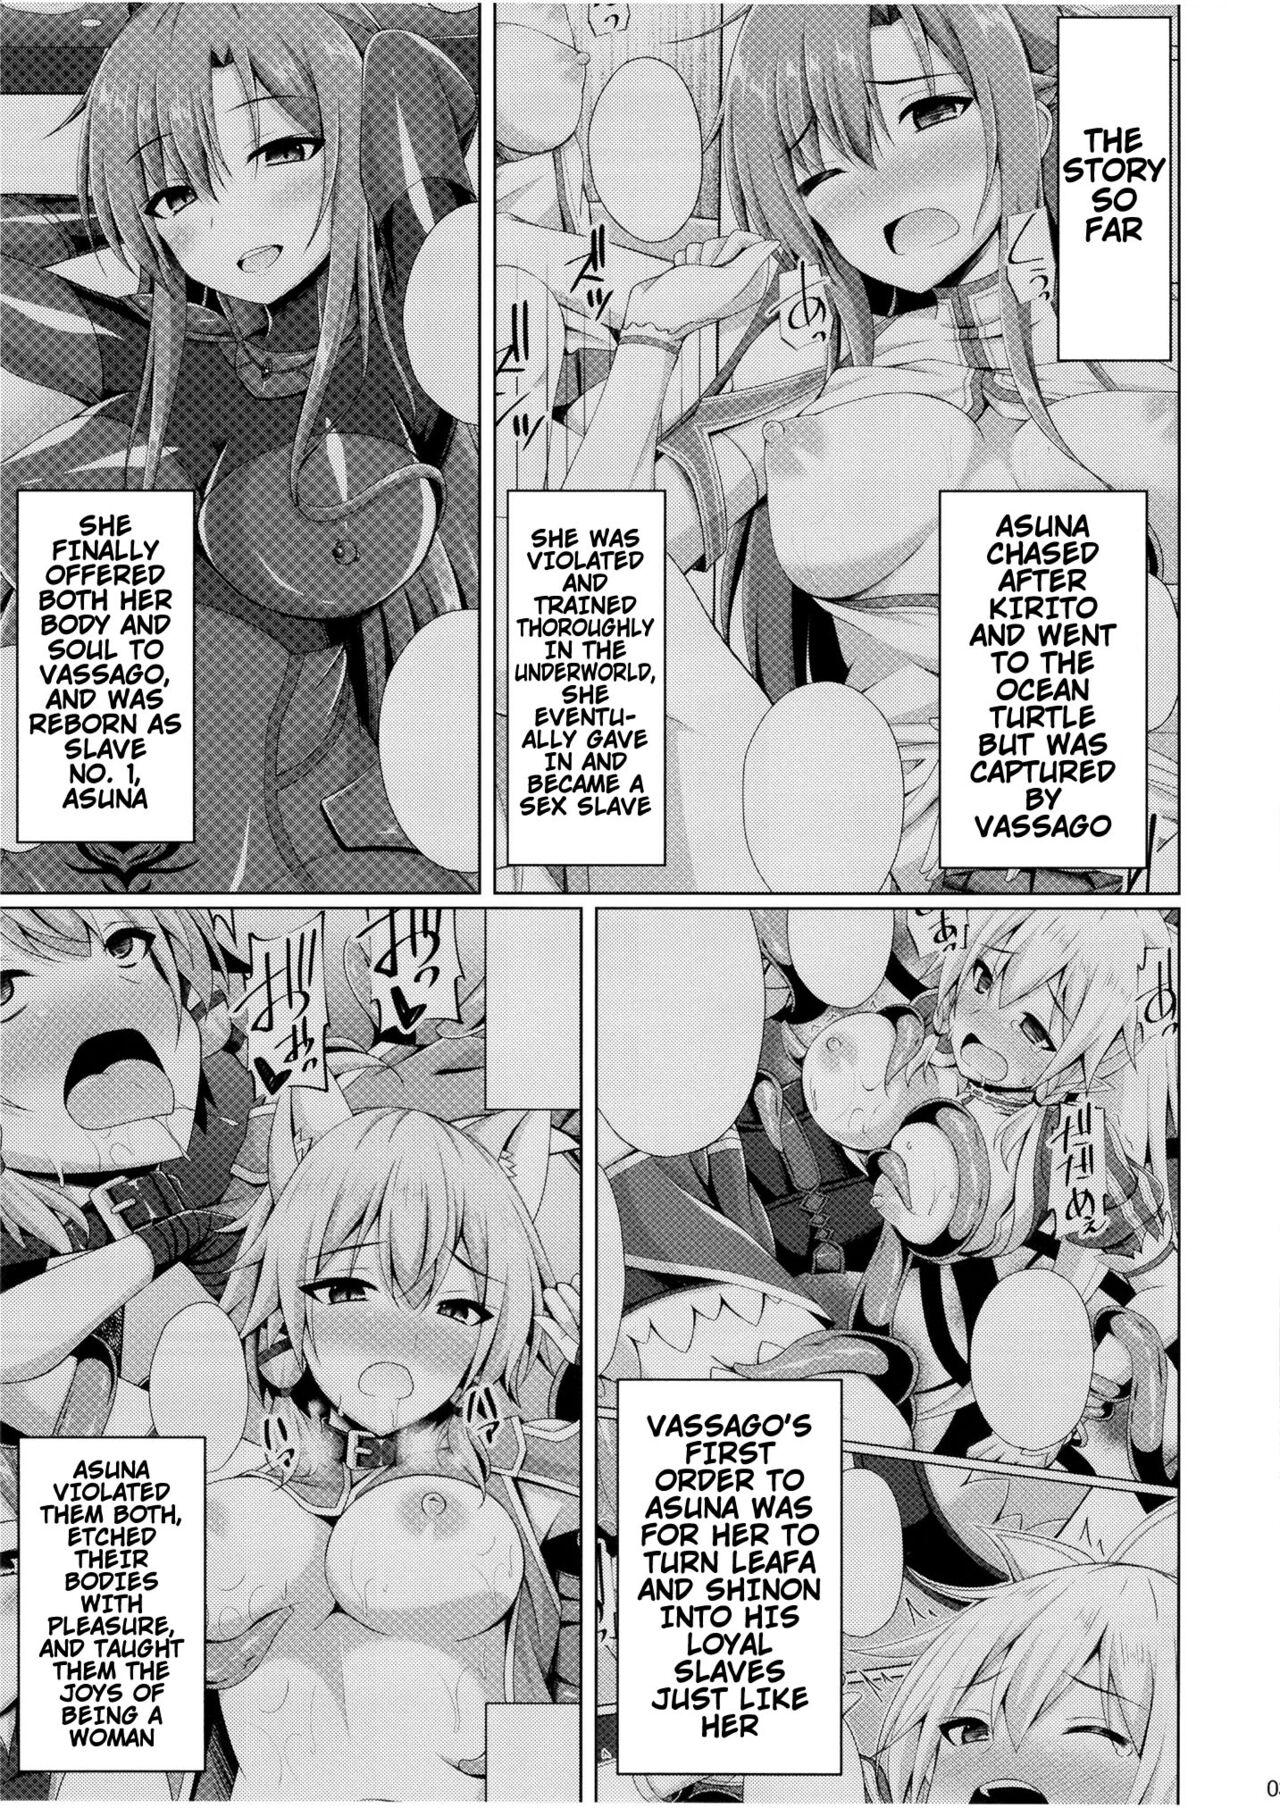 Compilation Kuro no Kenshito Yobareta Ore wa mou nai... | There's Nothing Left Of Me From When I Was The Black Knight - Sword art online Gros Seins - Page 2